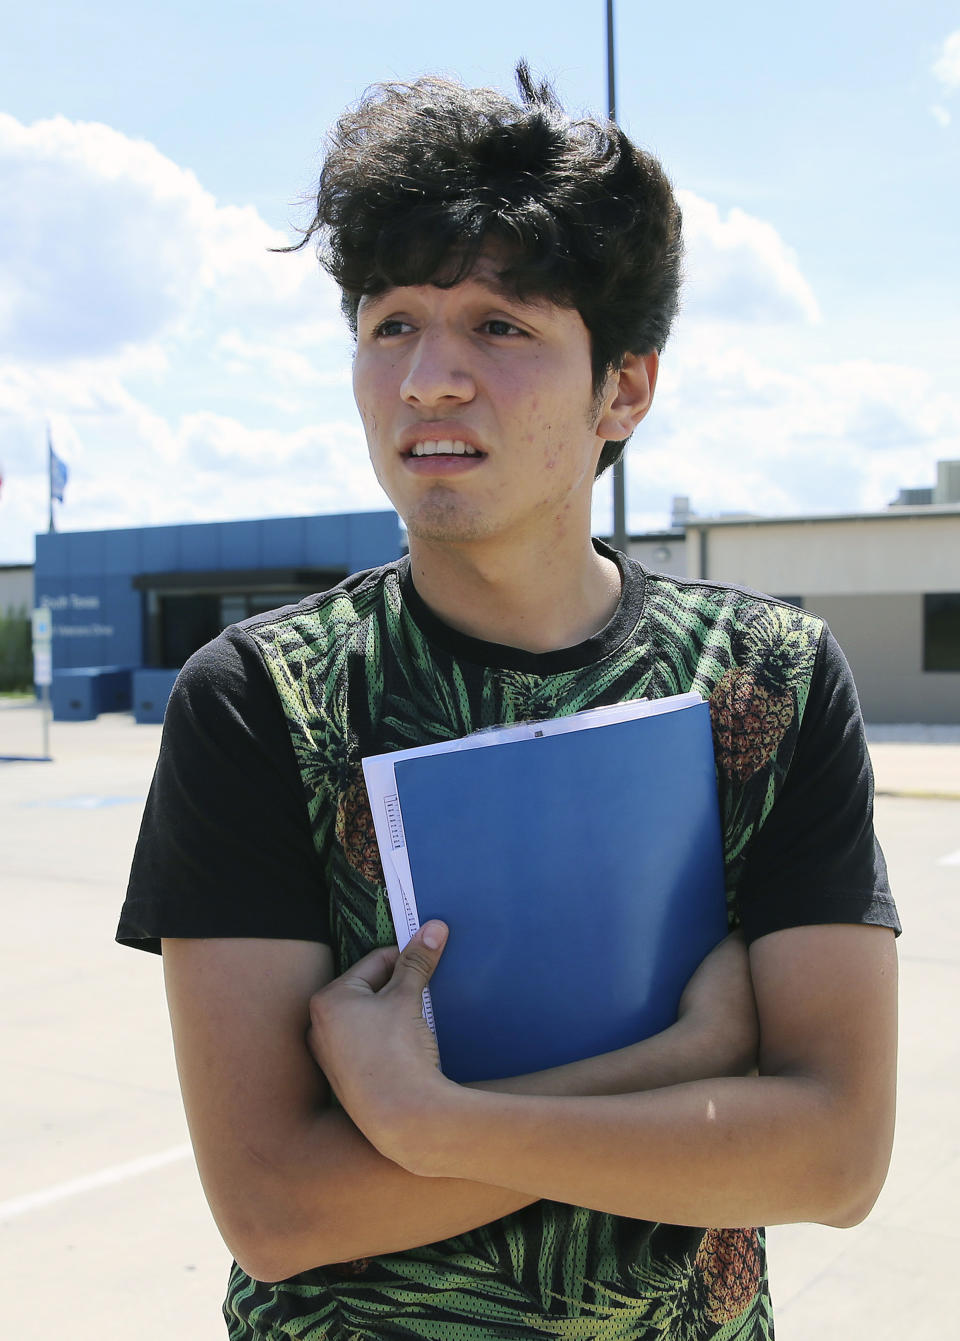 U.S. citizen Francisco Galicia, 18, walks out on his own from the South Texas Detention Facility in Pearsall, Texas, Tuesday, July 23, 2019. Galicia who was born in the U.S. has been released from immigration custody after wrongfully being detained for more than three weeks. Galicia was traveling north with a group of friends when they were stopped at a Border Patrol inland checkpoint, and he was detained for three weeks by the Border Patrol, then transferred to the ICE detention center. (Kin Man Hui/San Antonio Express-News)/The San Antonio Express-News via AP)